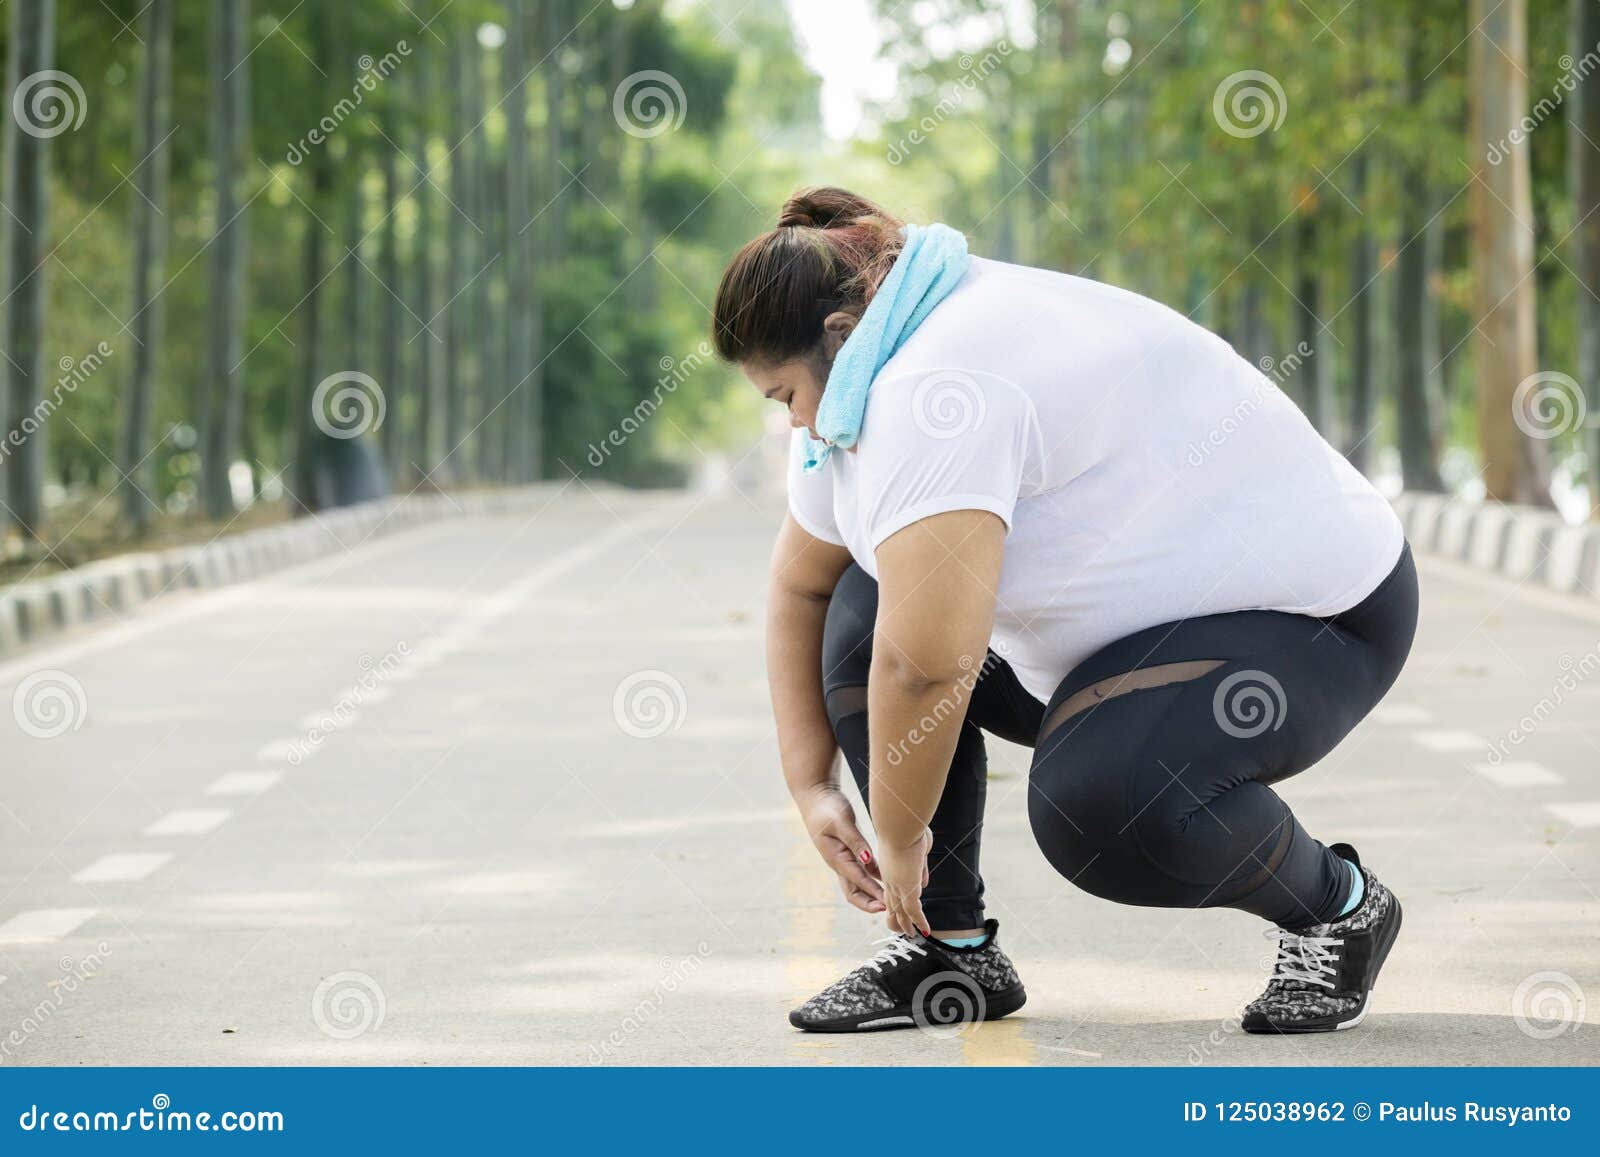 fat woman tying her shoelaces on the road